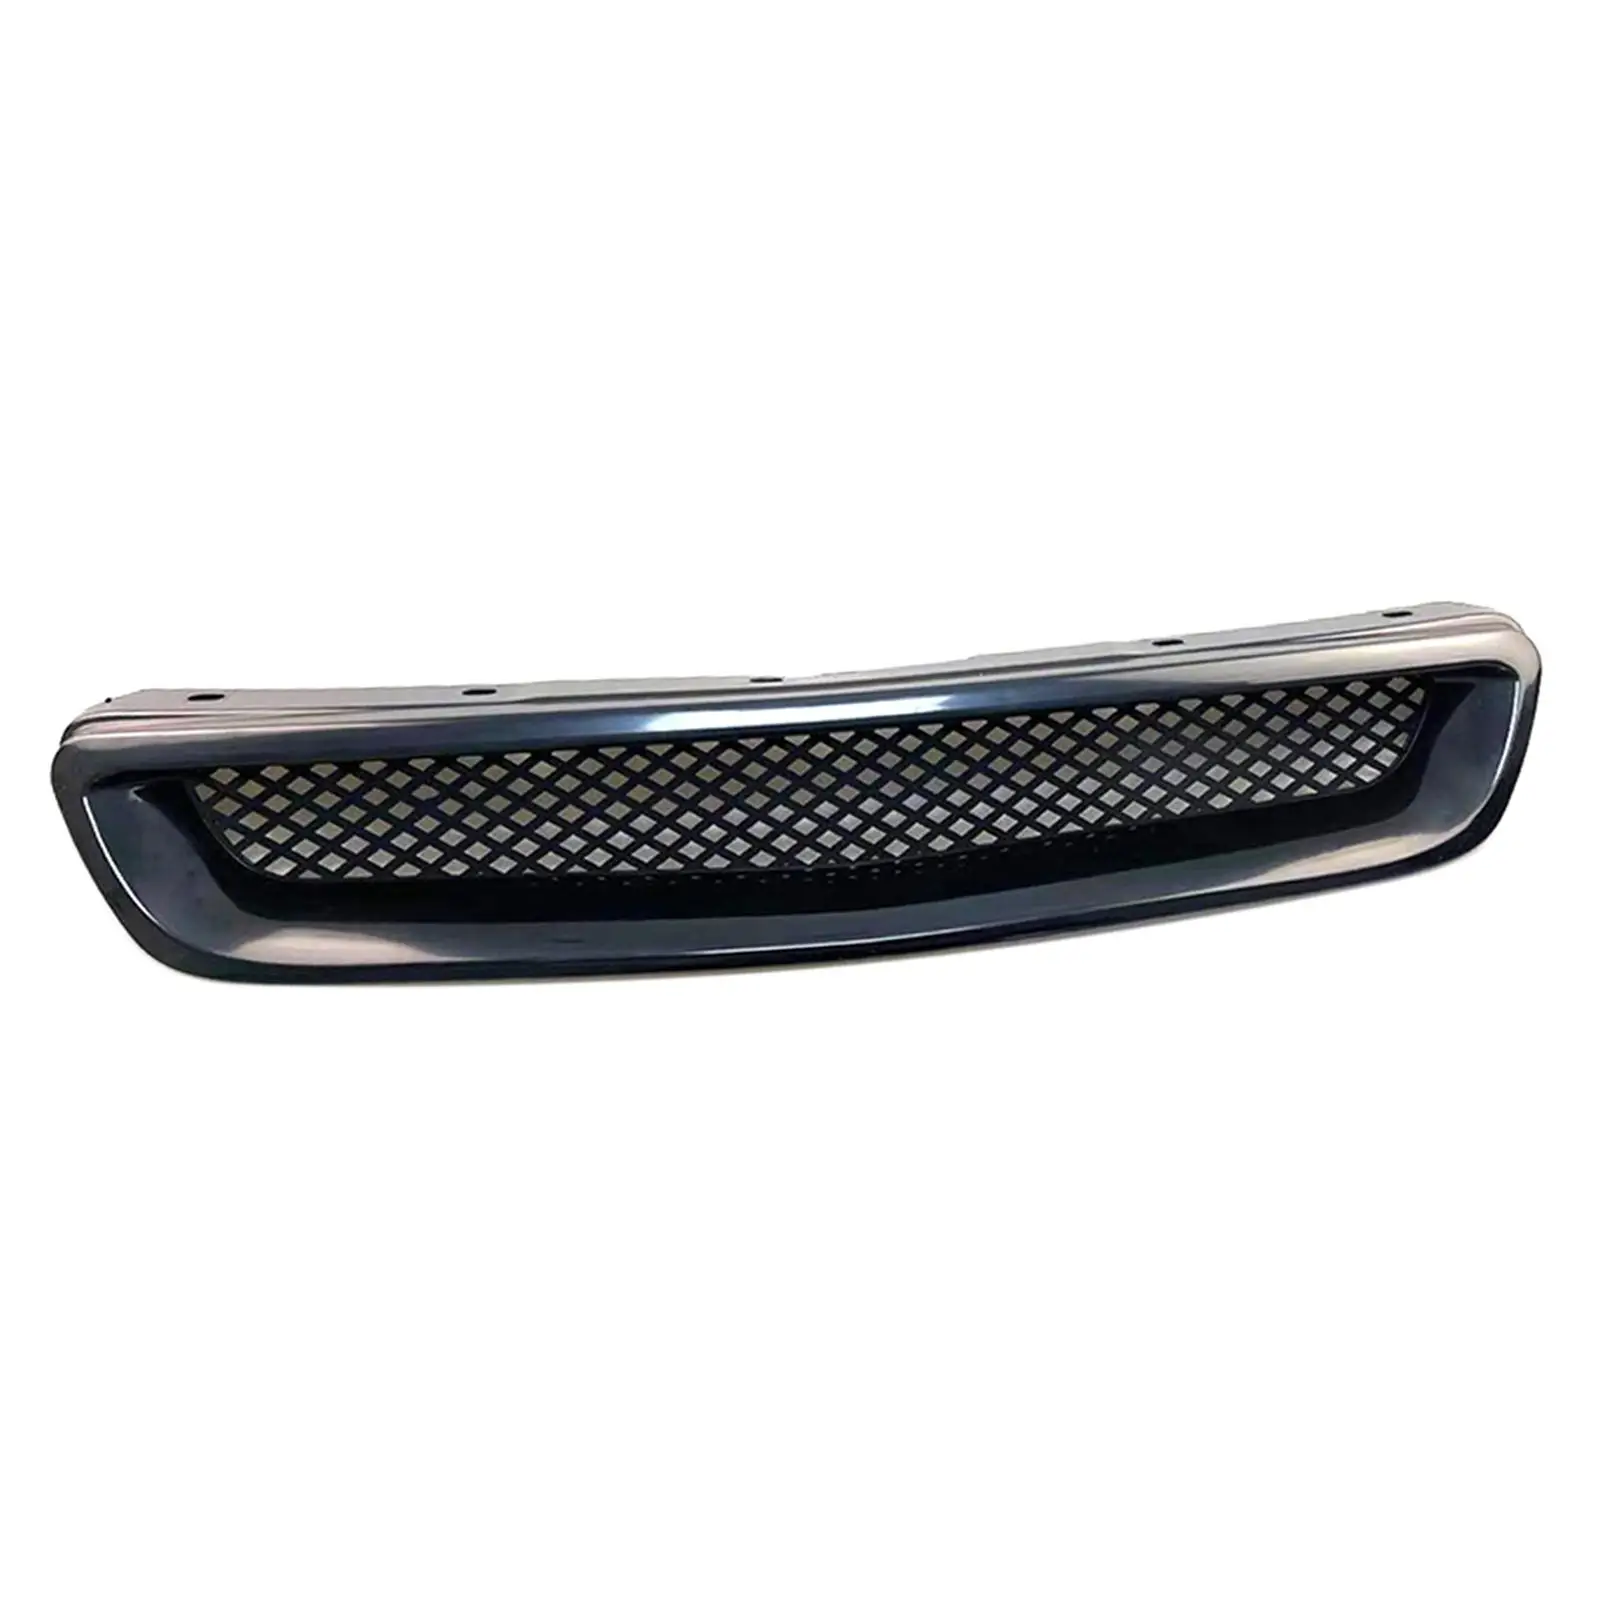 Front Bumper Hood Mesh Grille High Quality for Honda Civic 96-98